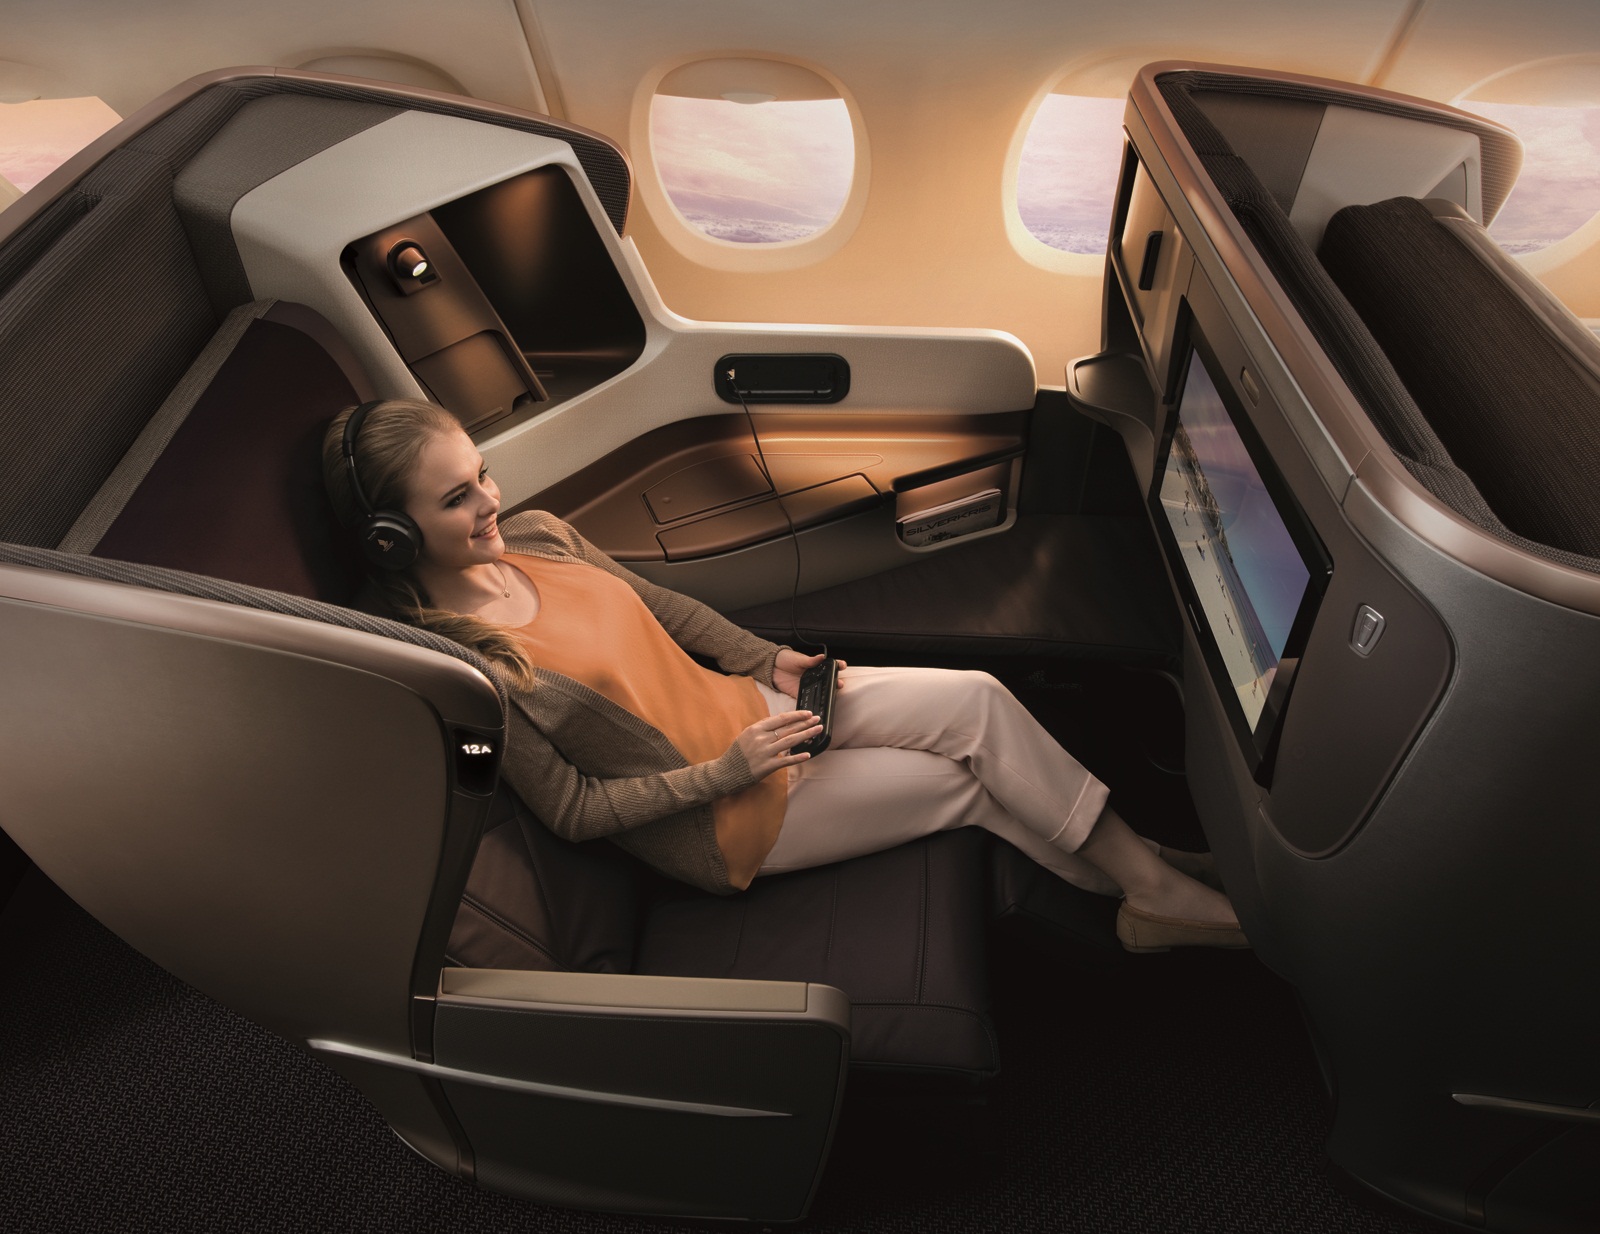 Singapore Airlines Business Class Boeing 777-300ER